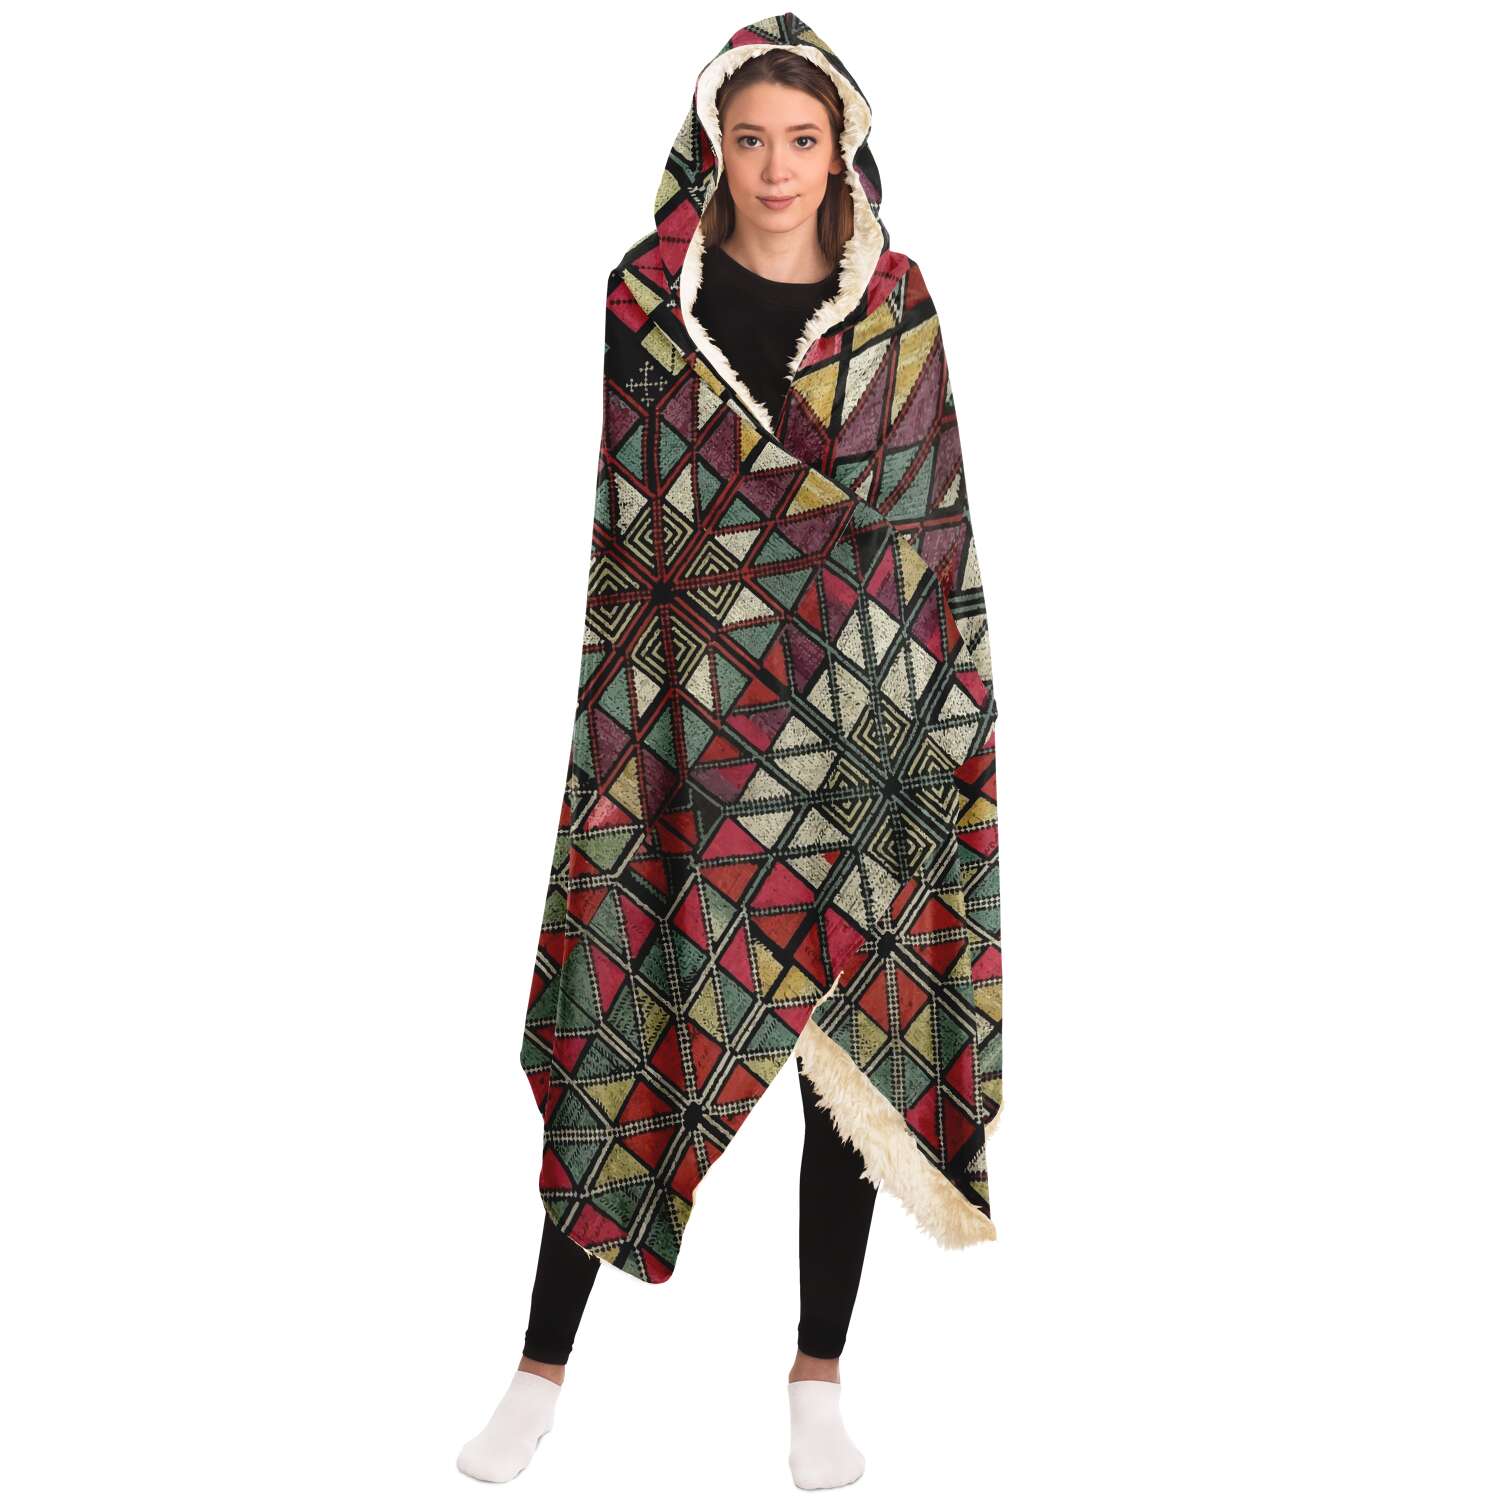 Hooded Blanket - AOP Sherpa Hooded Blanket, Miao Culture Antique, Traditional Design